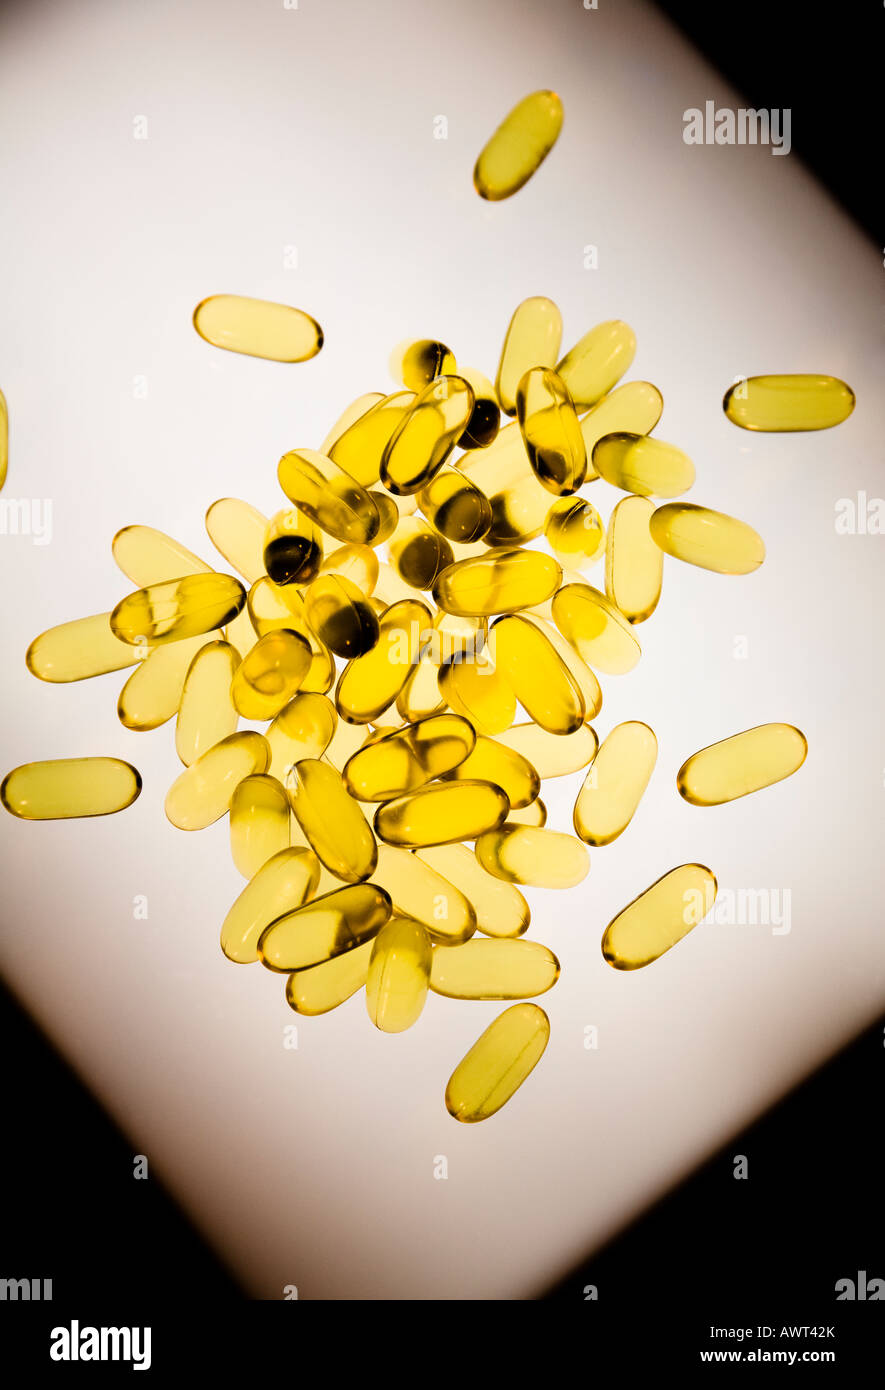 Omega-3 vitamin tablets lit from below Stock Photo